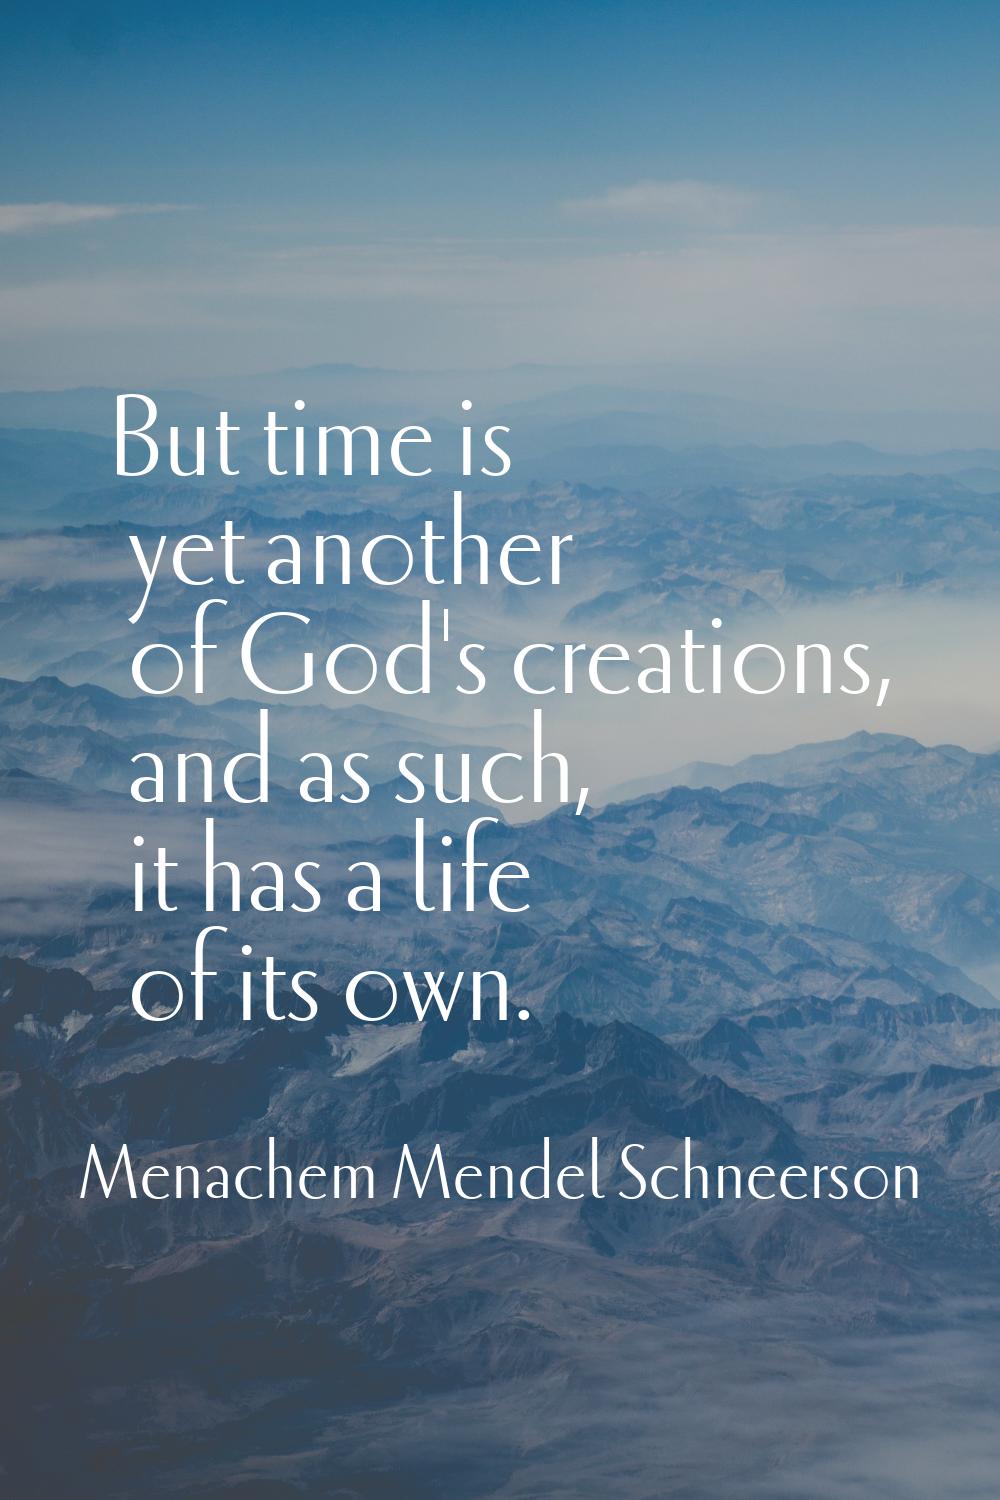 But time is yet another of God's creations, and as such, it has a life of its own.